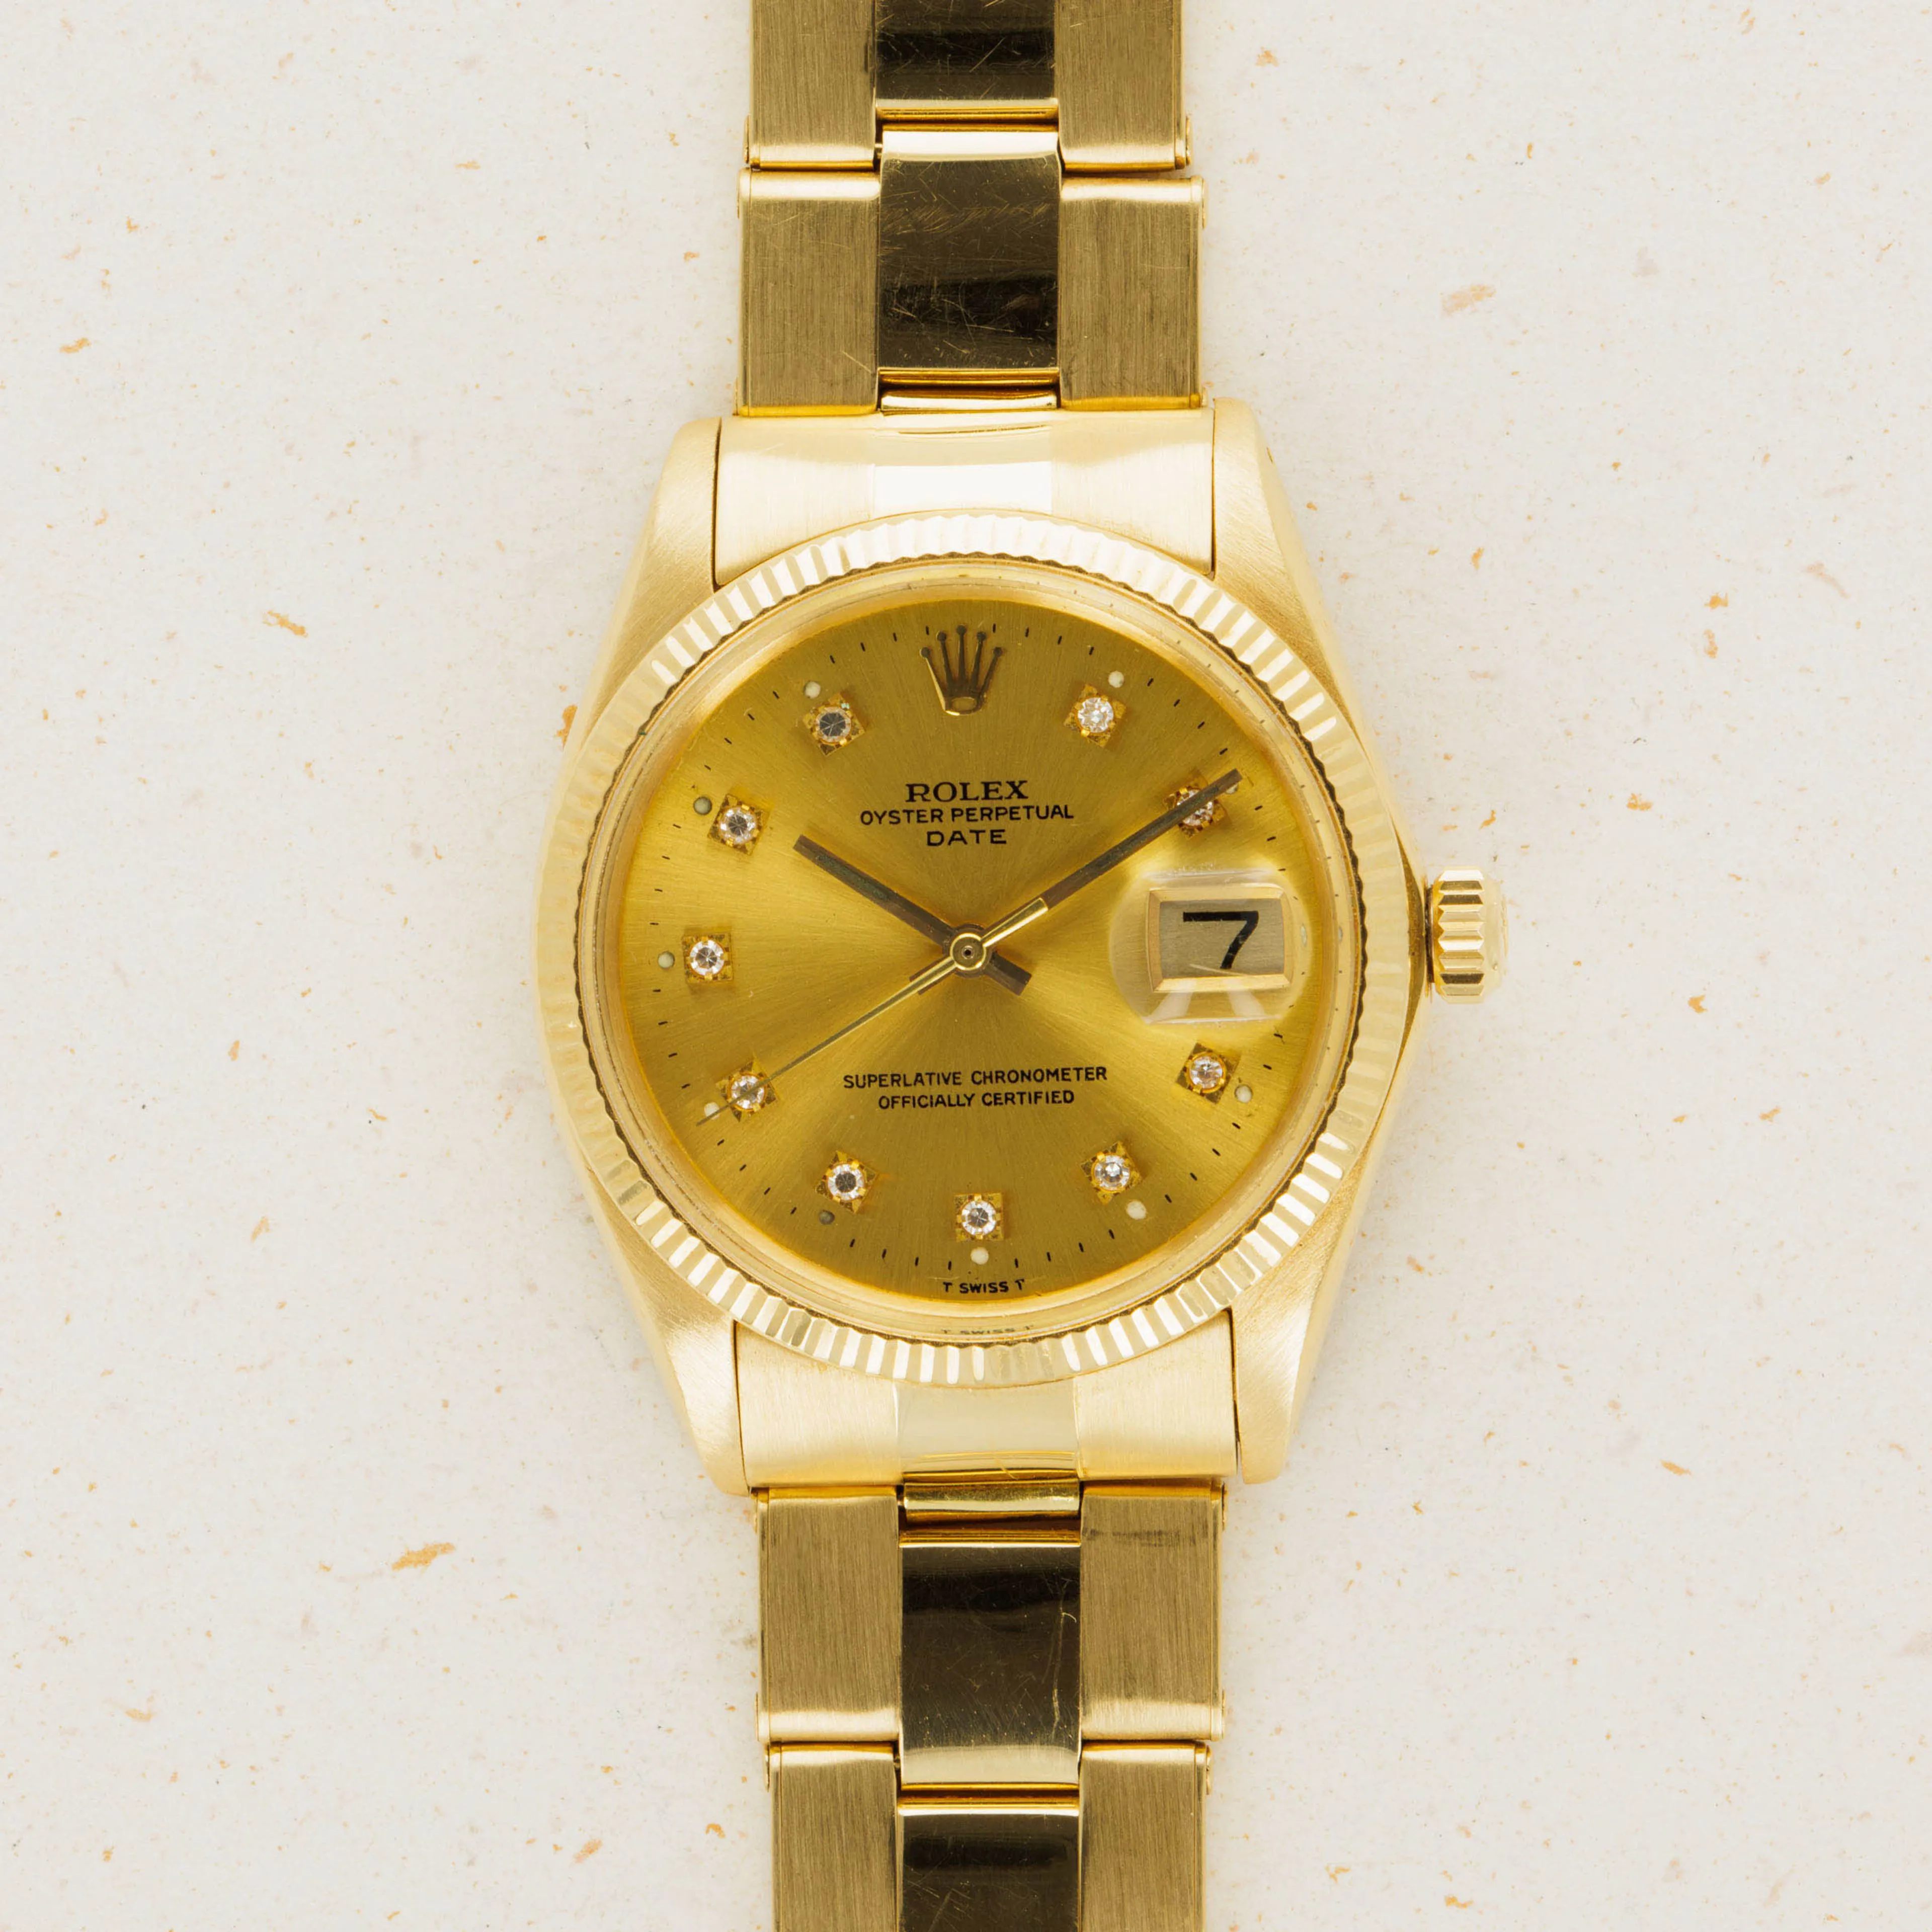 Rolex Oyster Perpetual Date 1503 nullmm